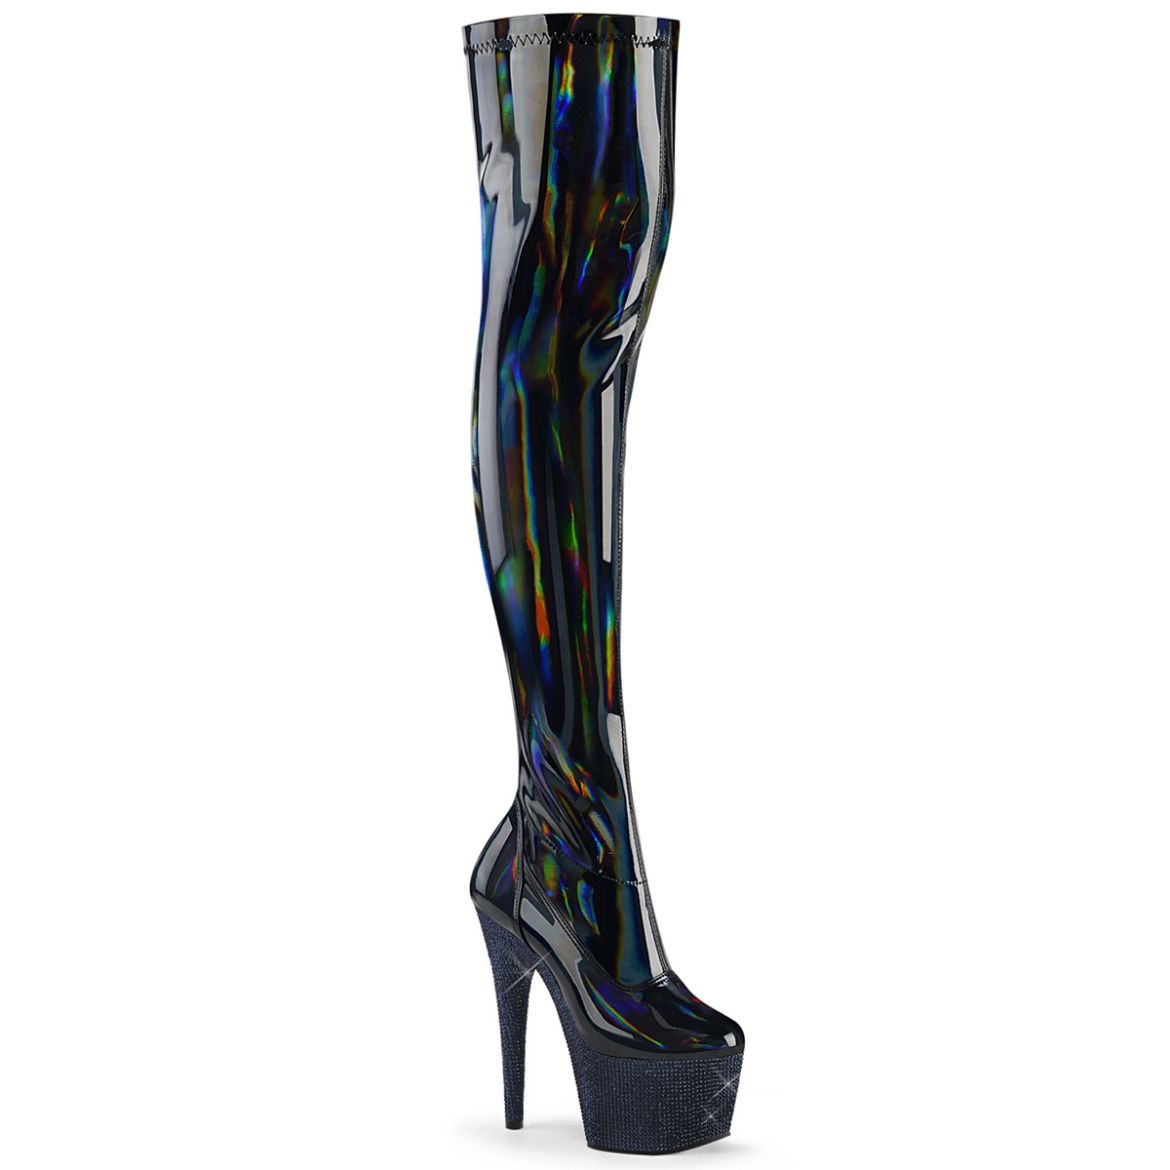 Product image of Pleaser BEJEWELED-3000-7 Blk Str Holo Pat/Midnight Blk RS 7 Inch Heel 2 3/4 Inch PF Stretch Thigh Boot w/RS Side Zip